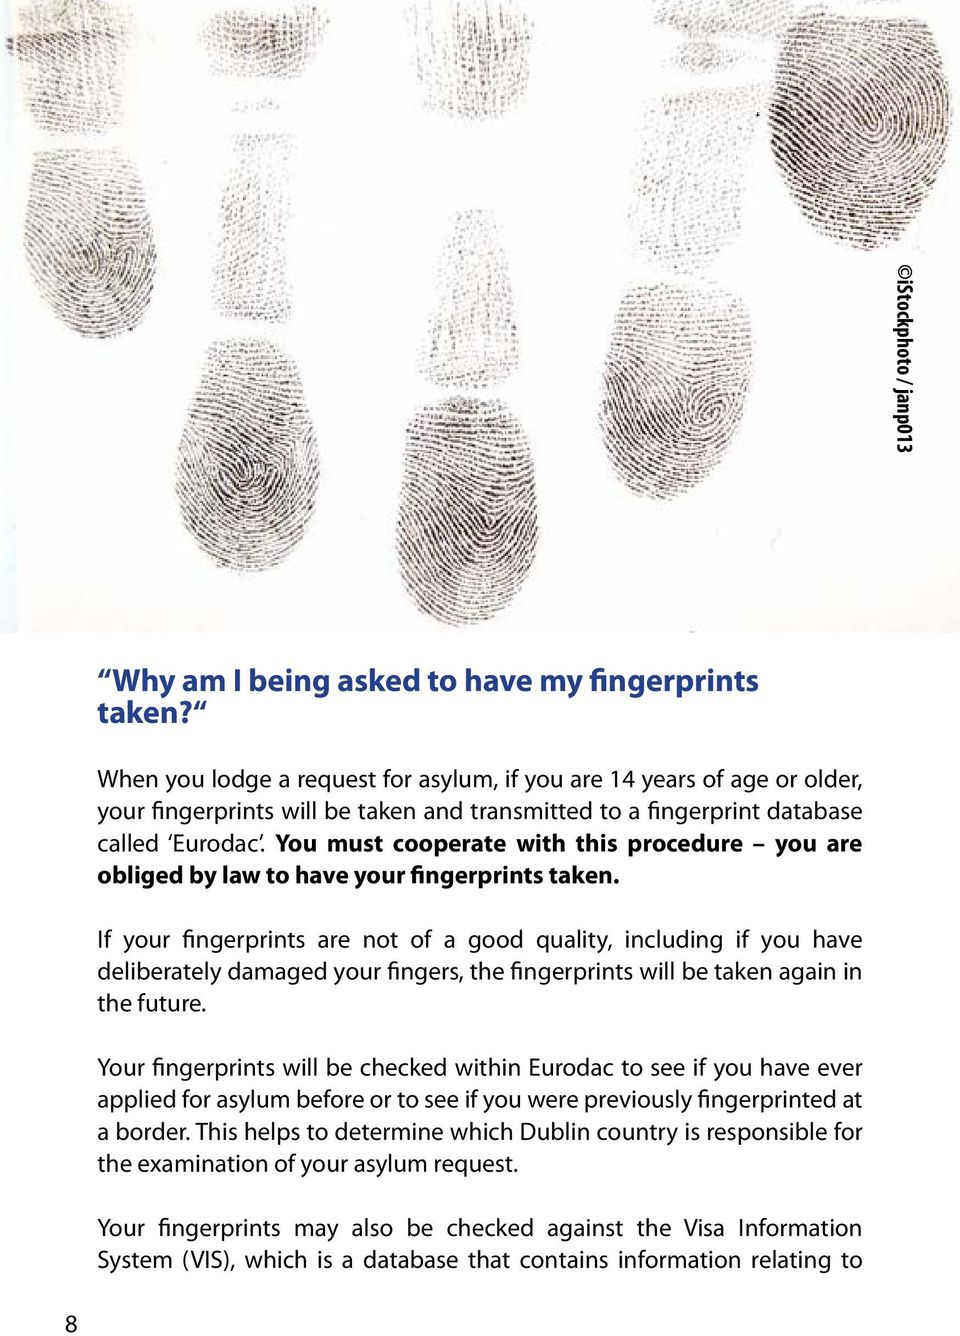 You must cooperate with this procedure you are obliged by law to have your fingerprints taken.